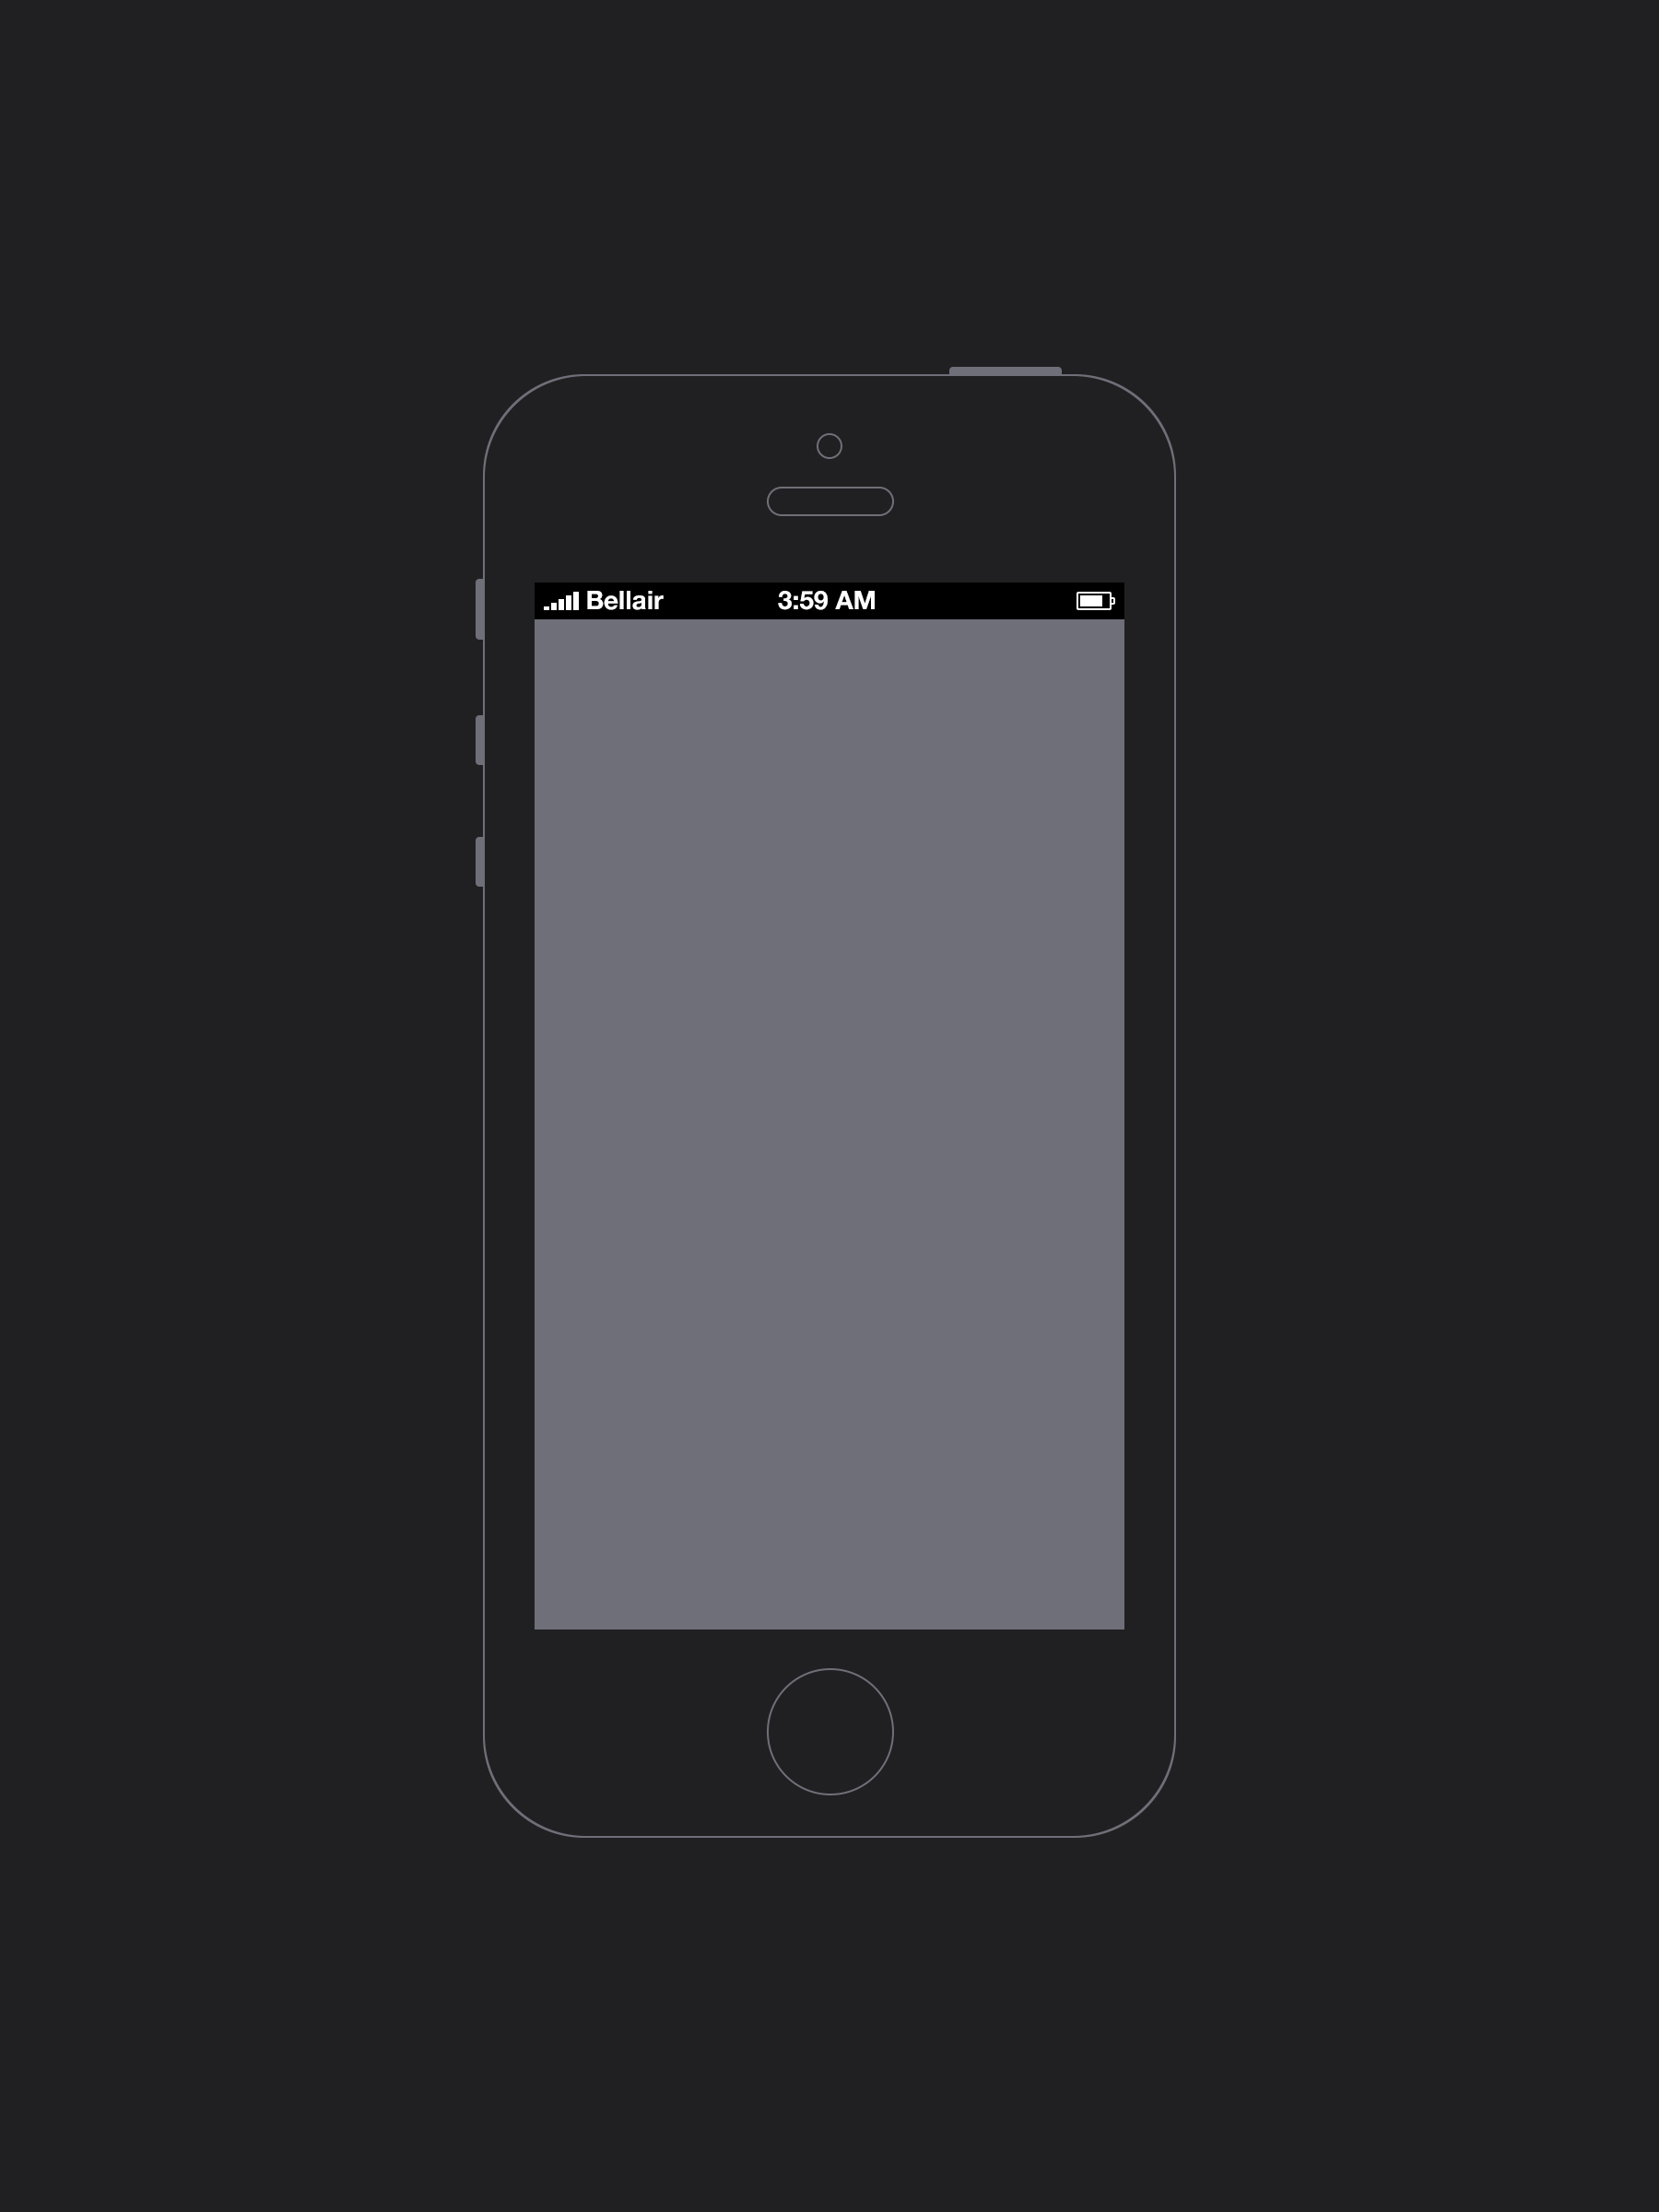 iOS iPhone Wireframe Template Mockup PSD